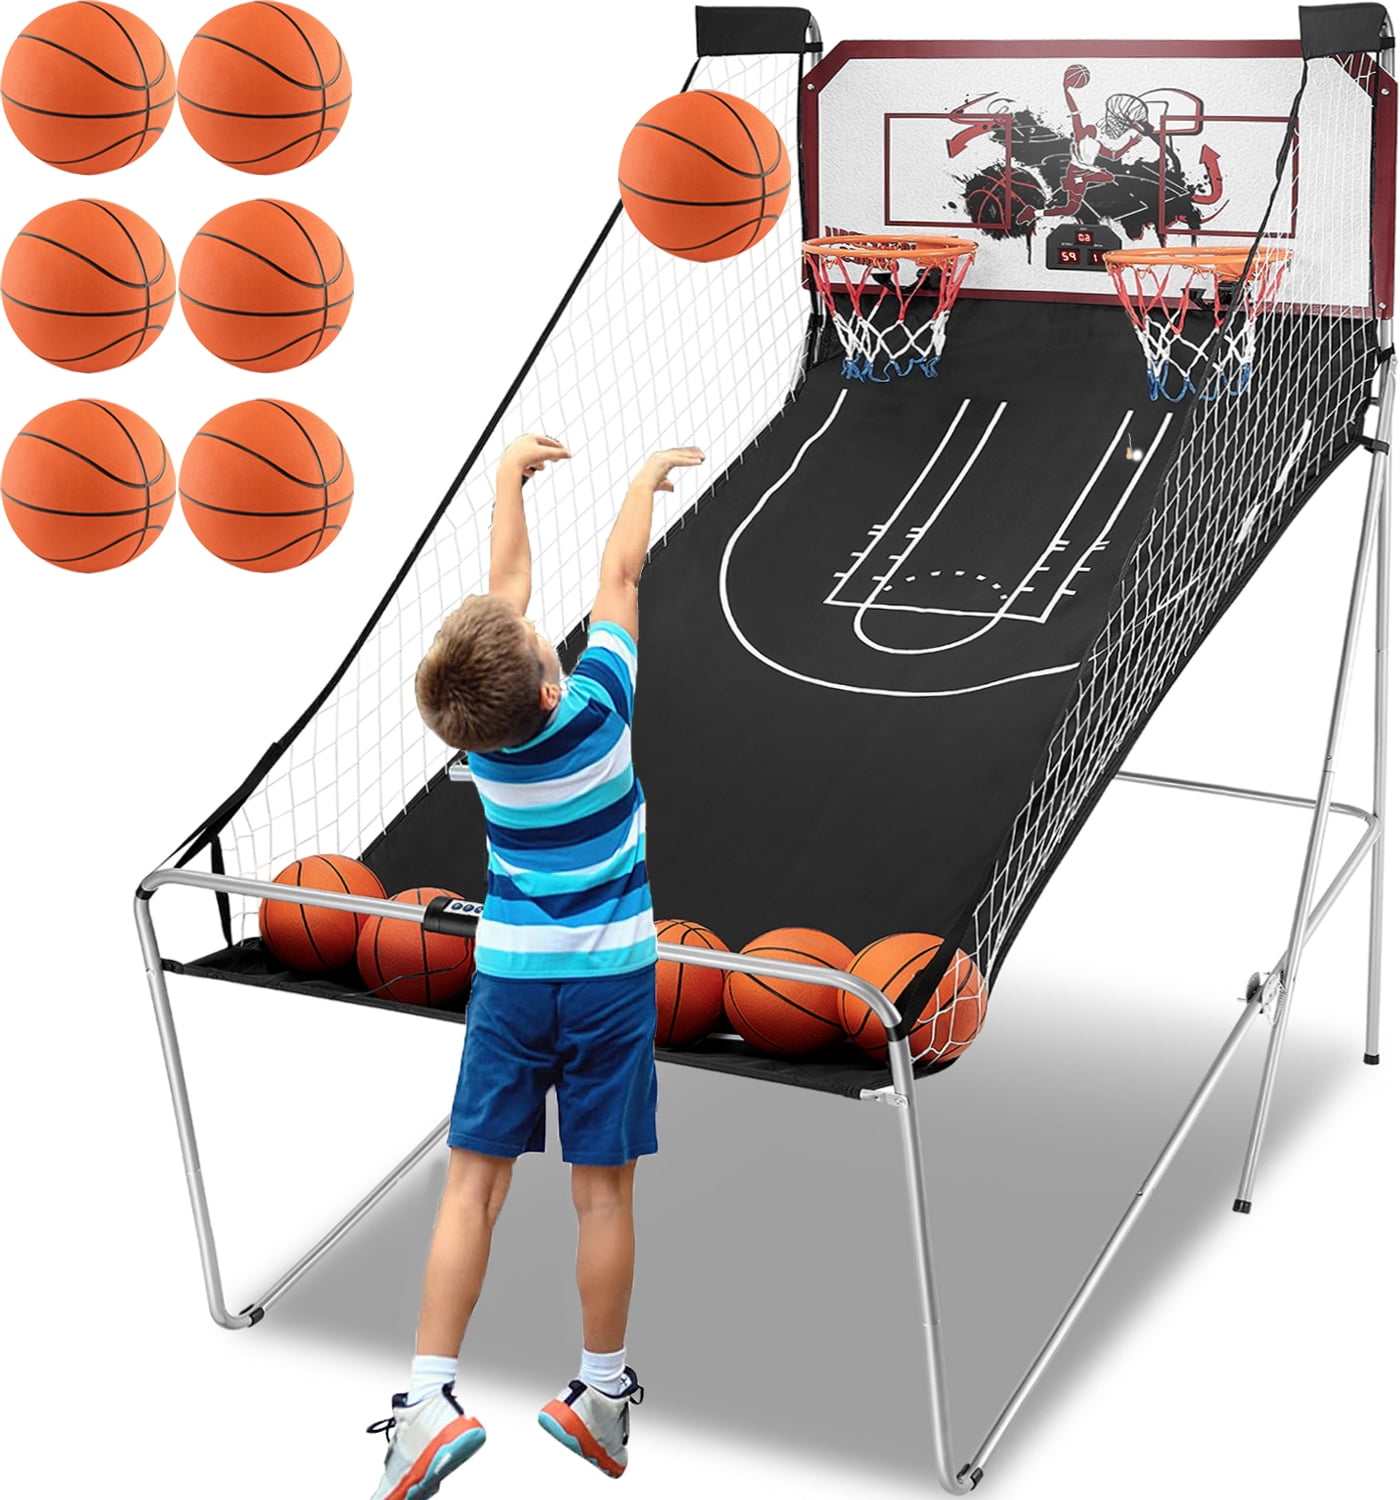  UBACKS Electronic Basketball Arcade Game Indoor - Foldable,  Dual Shot, with 4 Balls and 1 Air Pump : Toys & Games